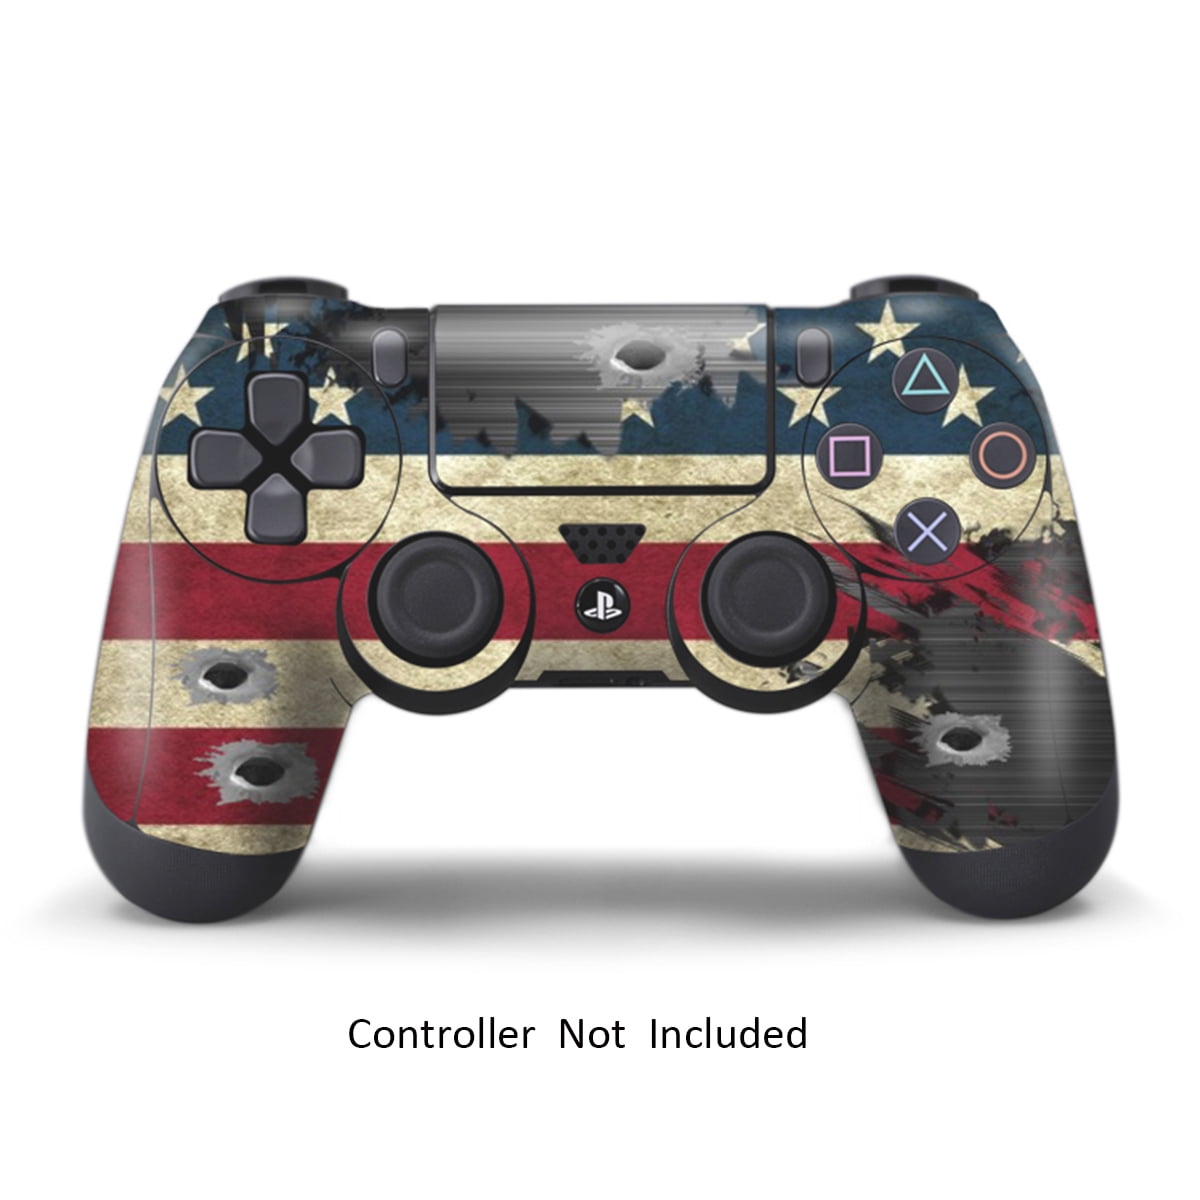 PS4 Skins Playstation 4 Games Sony PS4 Games Decals Custom PS4 Controller Stickers PS4 Remote Playstation 4 Controller Dualshock Vinyl Decal vinilo Calcomanía - Battle Torn Stripes - Walmart.com